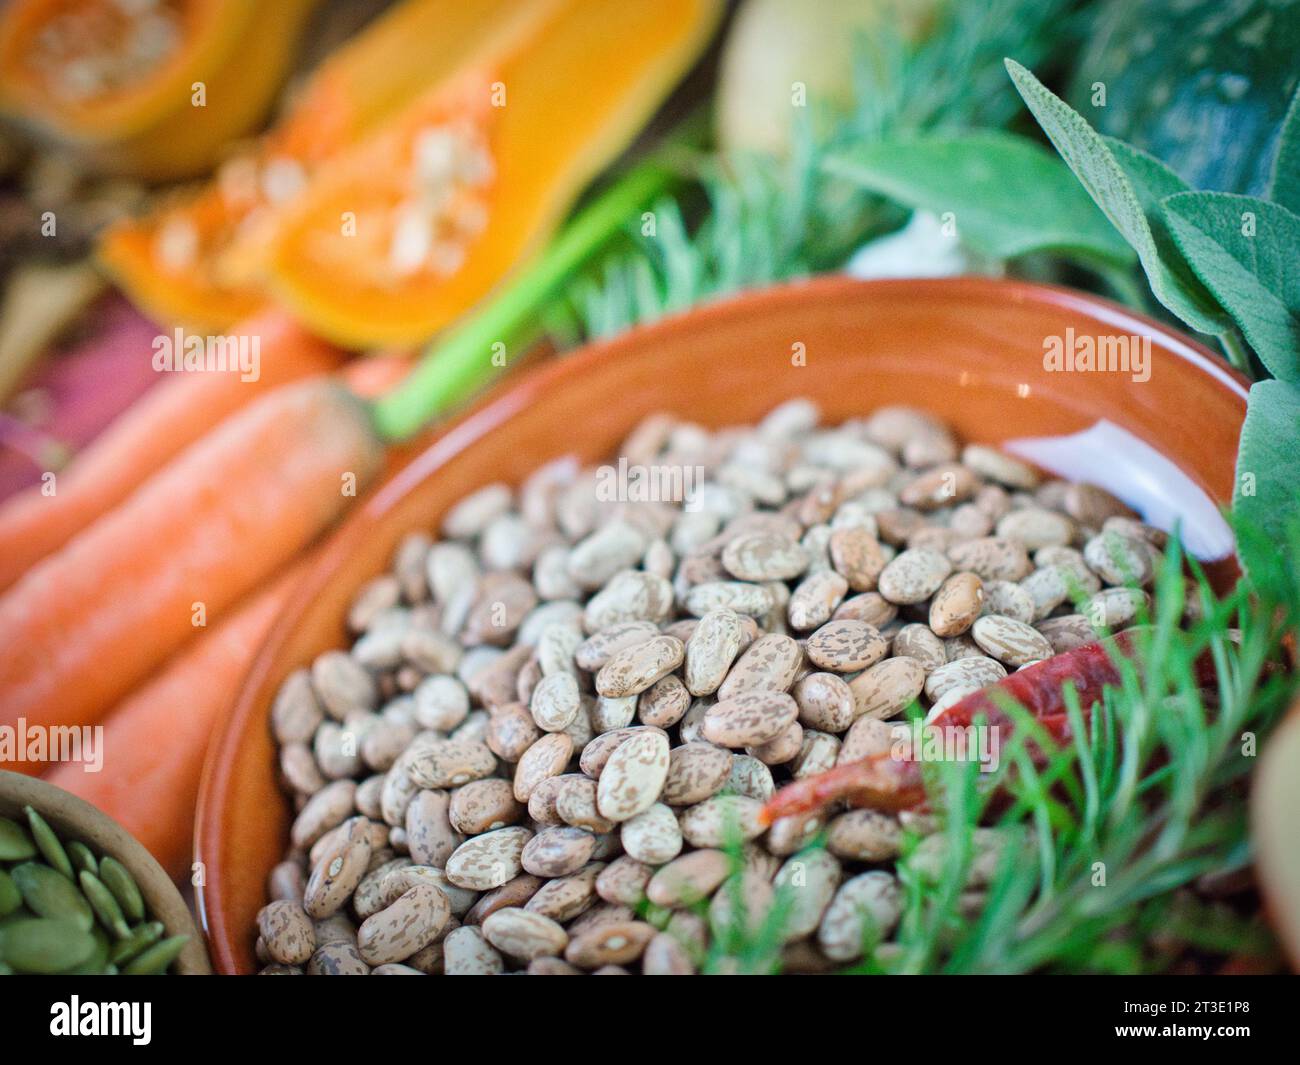 Beautiful ingredients array of colorful vegetarian ingredients with pinto bean legume protein for fall, Thanksgiving, or year round healthy diet. Stock Photo